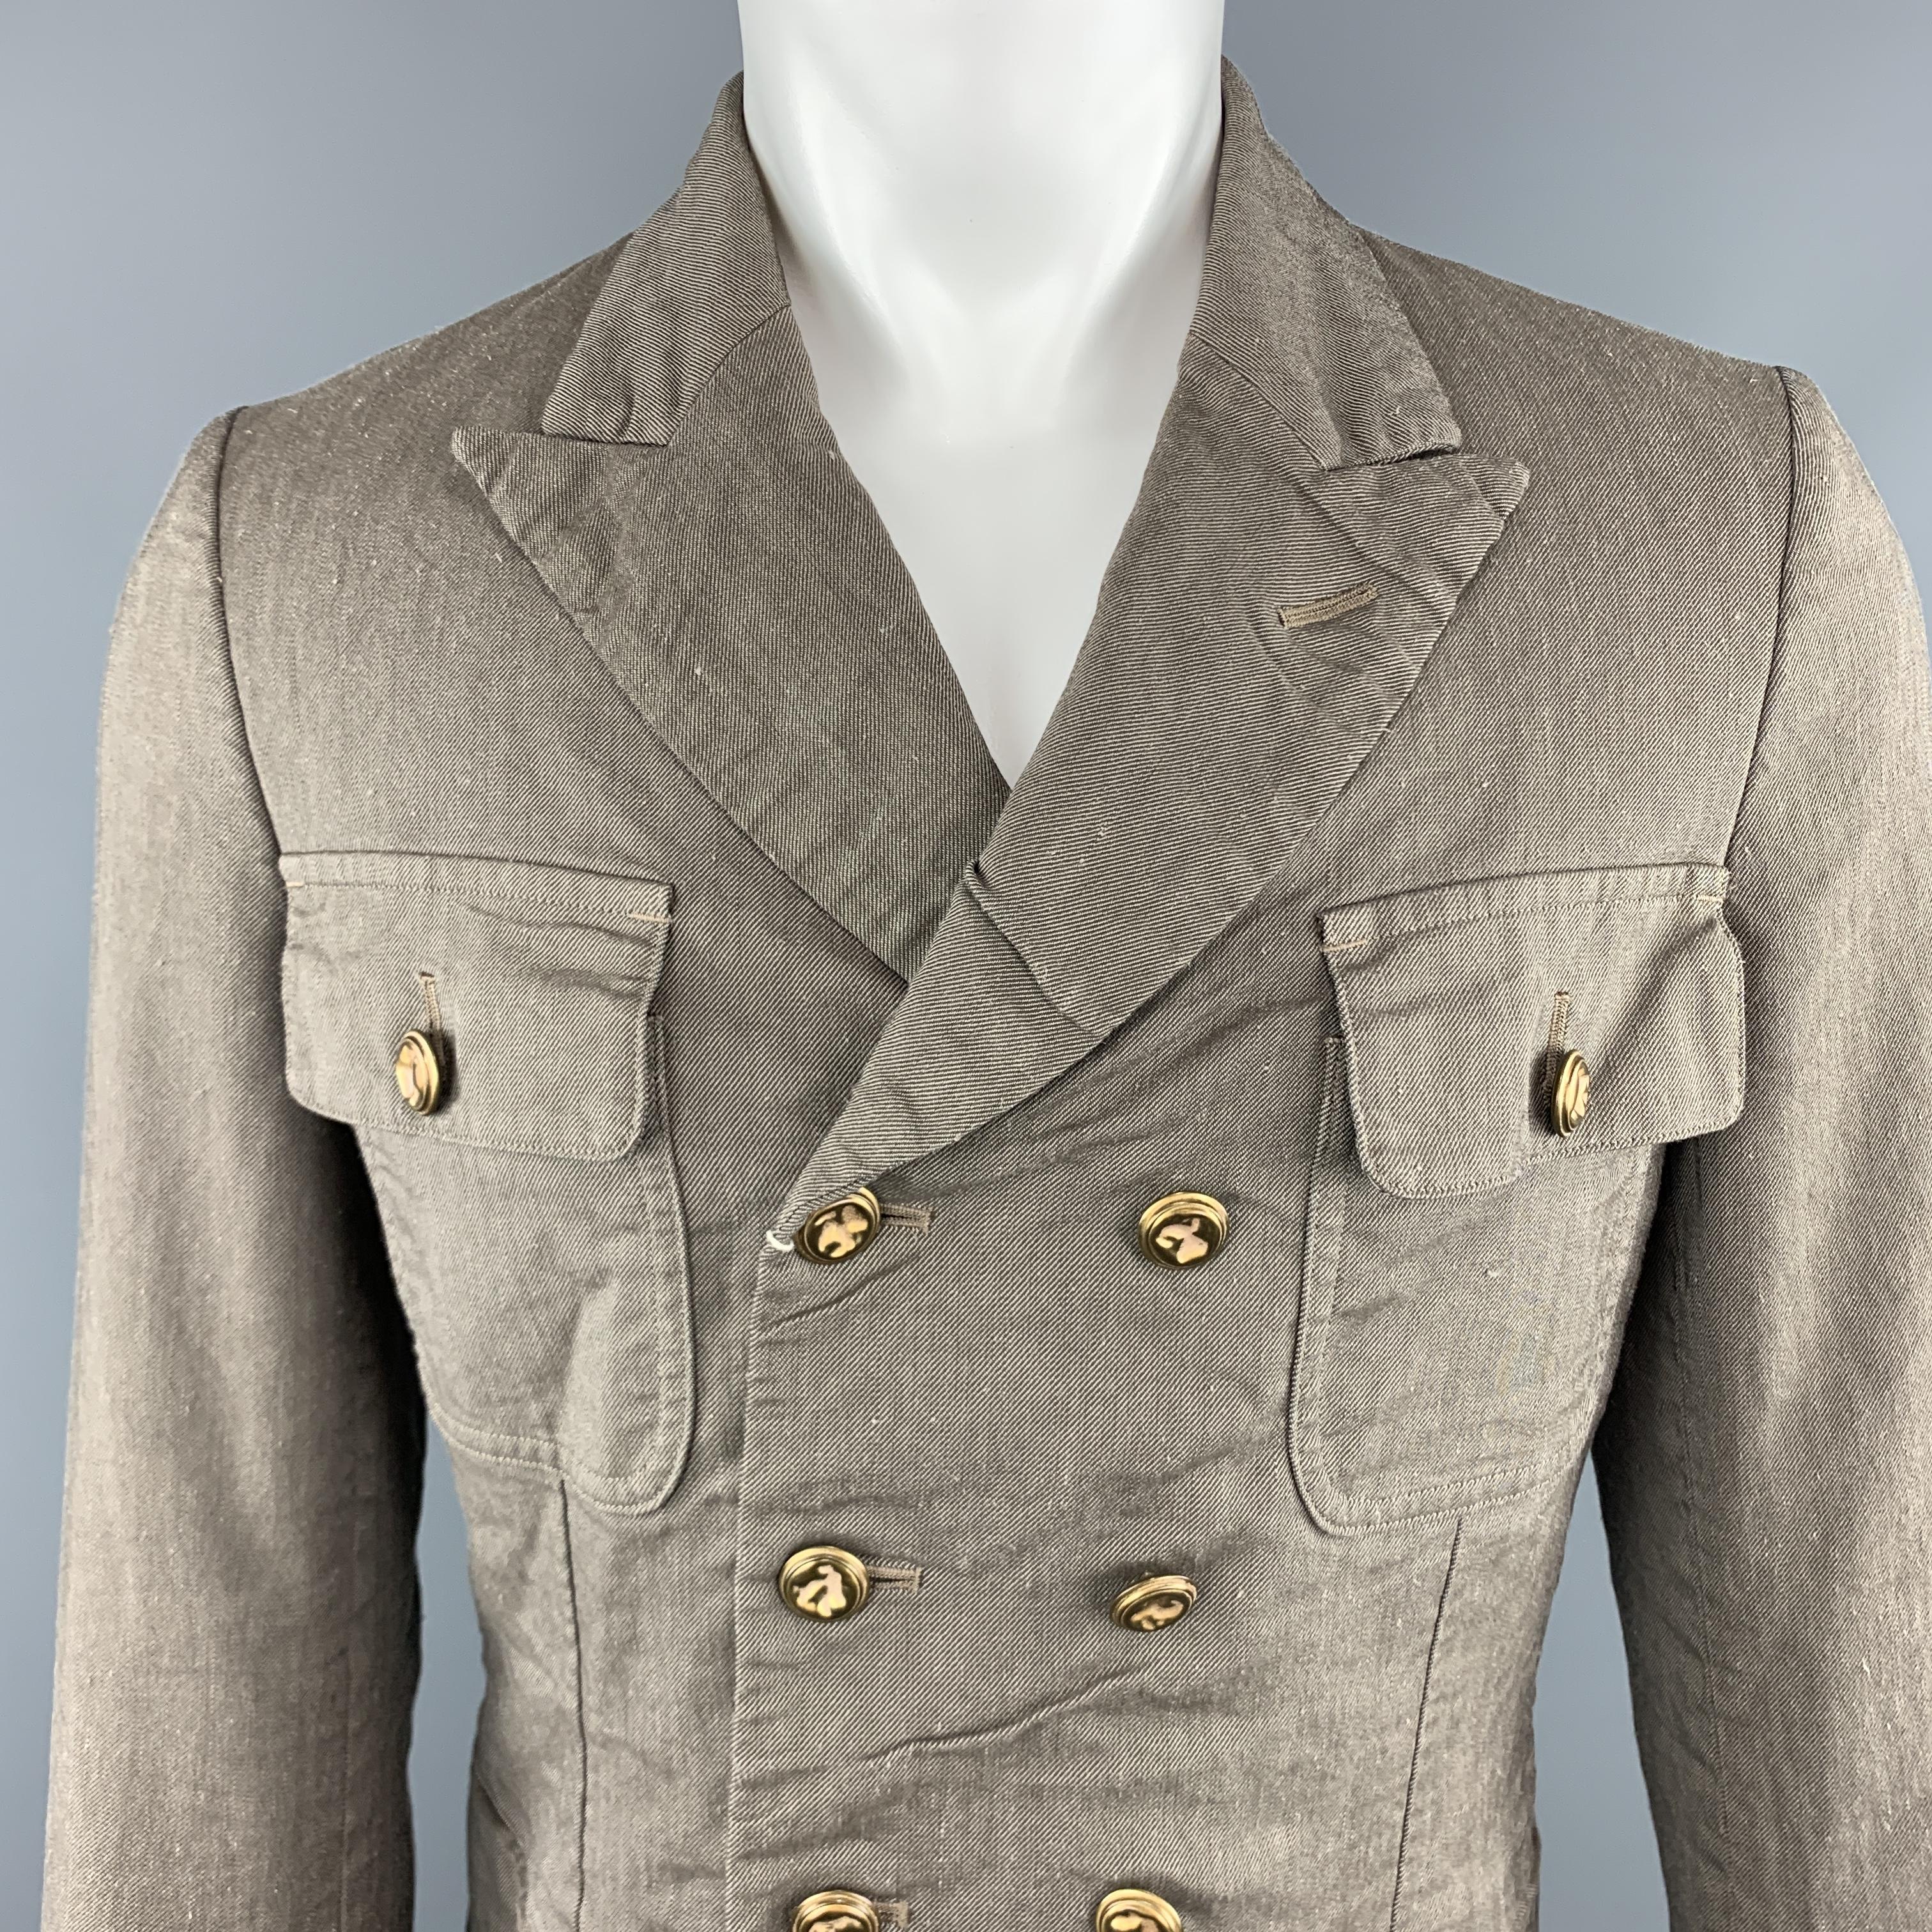 COMME des GARCONS HOMME PLUS military style jacket comes in a distressed textured linen blend twill with gold tone hammered buttons, double breasted front, patch flap pockets, peak lapel, flap button cuffs. Made in Japan.

New with Tags. Pre-Owned